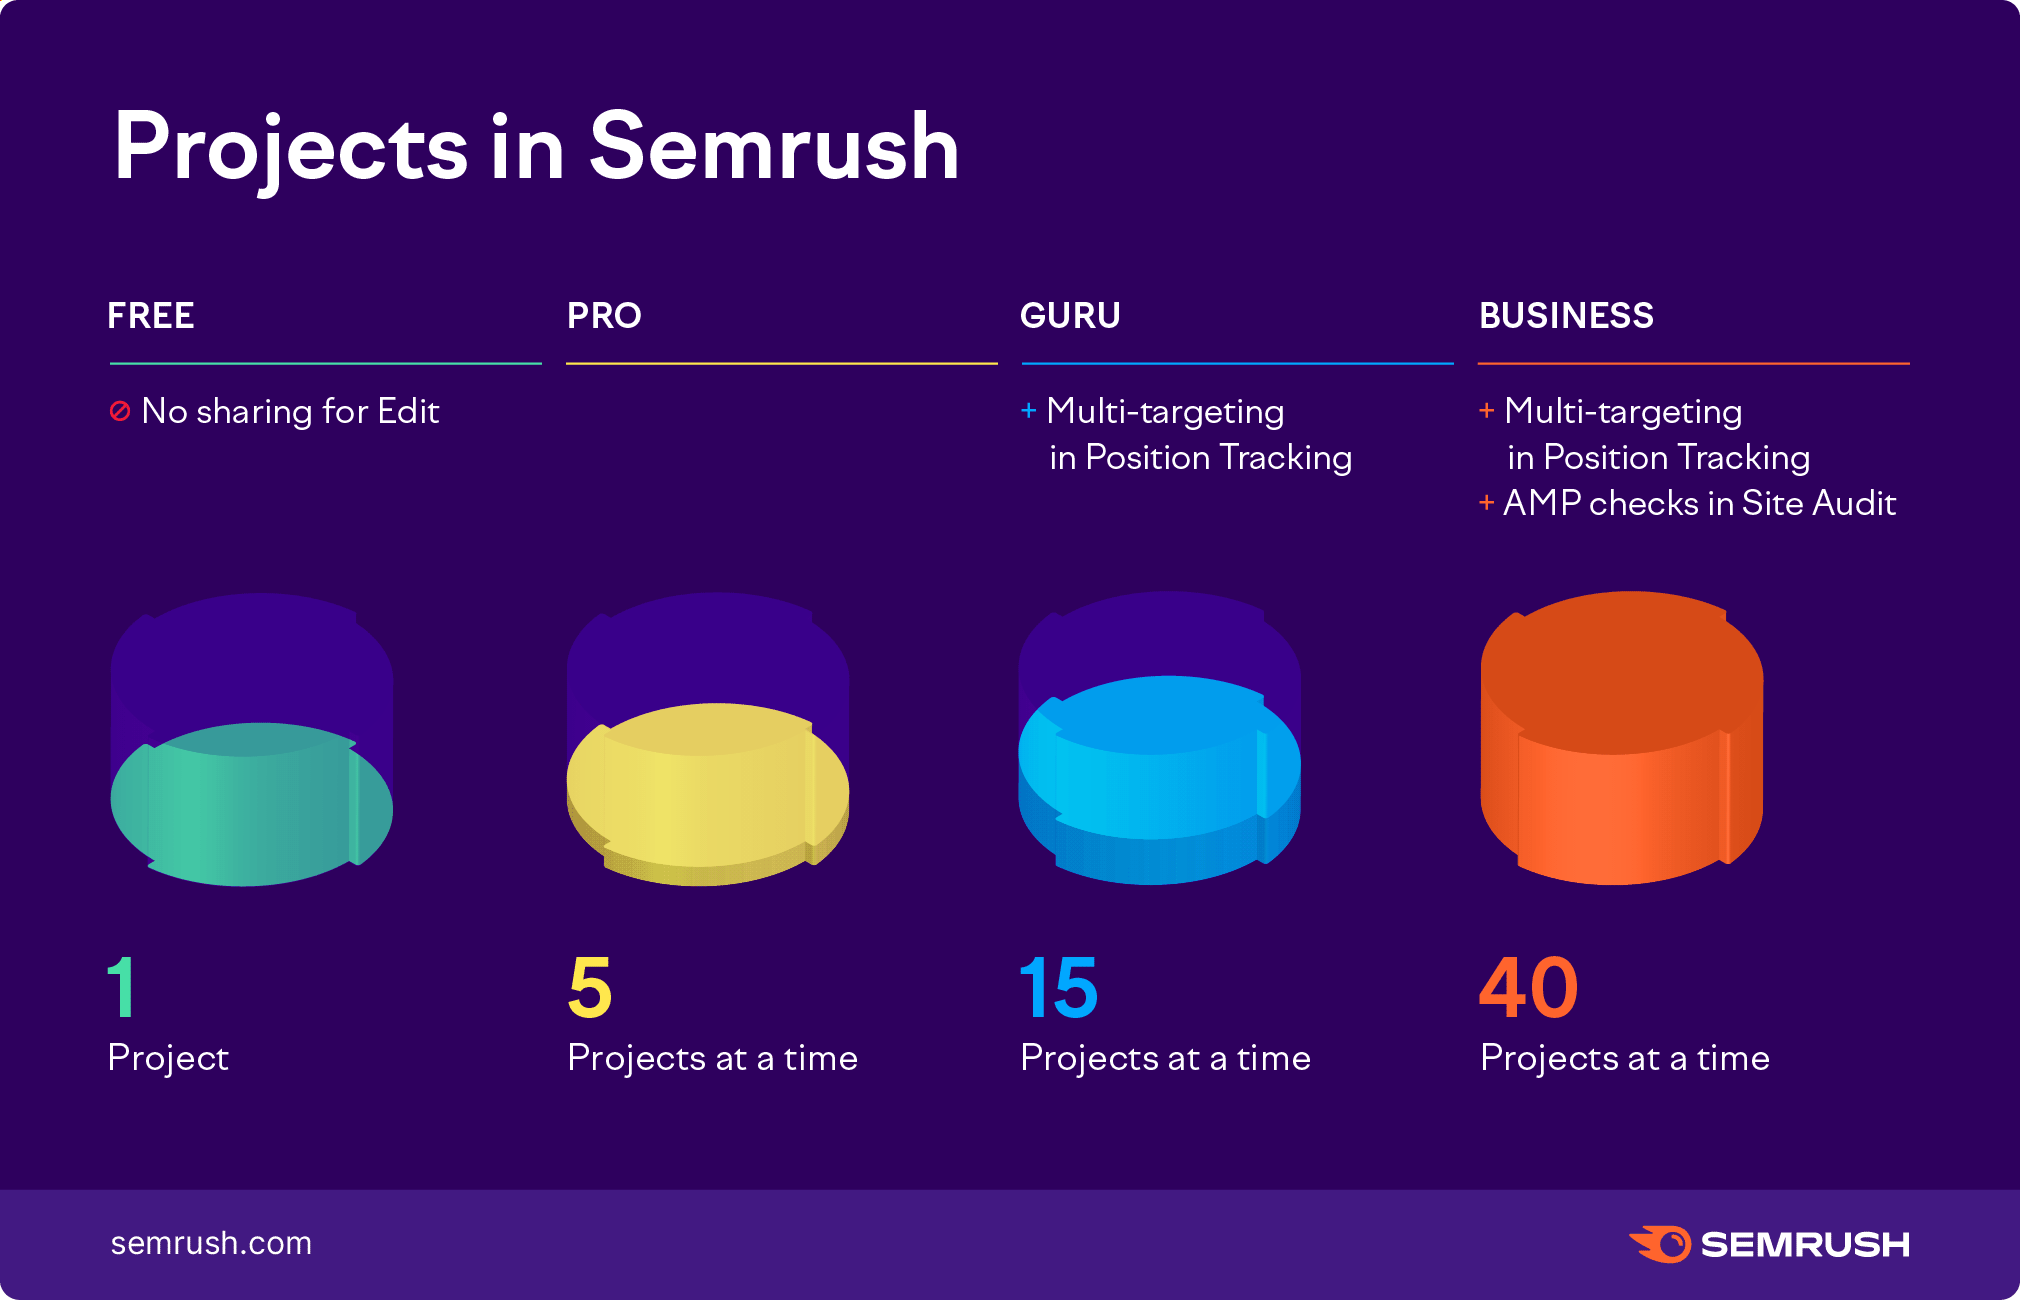 Project limits in Semrush. Pro plan: No sharing for edit, 1 Project. Pro plan: 5 Projects at a time. Guru plan: multi-targeting in Position Tracking, 15 Projects at a time. Business plan: multi-targeting in Position Tracking, AMP checks in Site Audit, 40 Projects at a time.